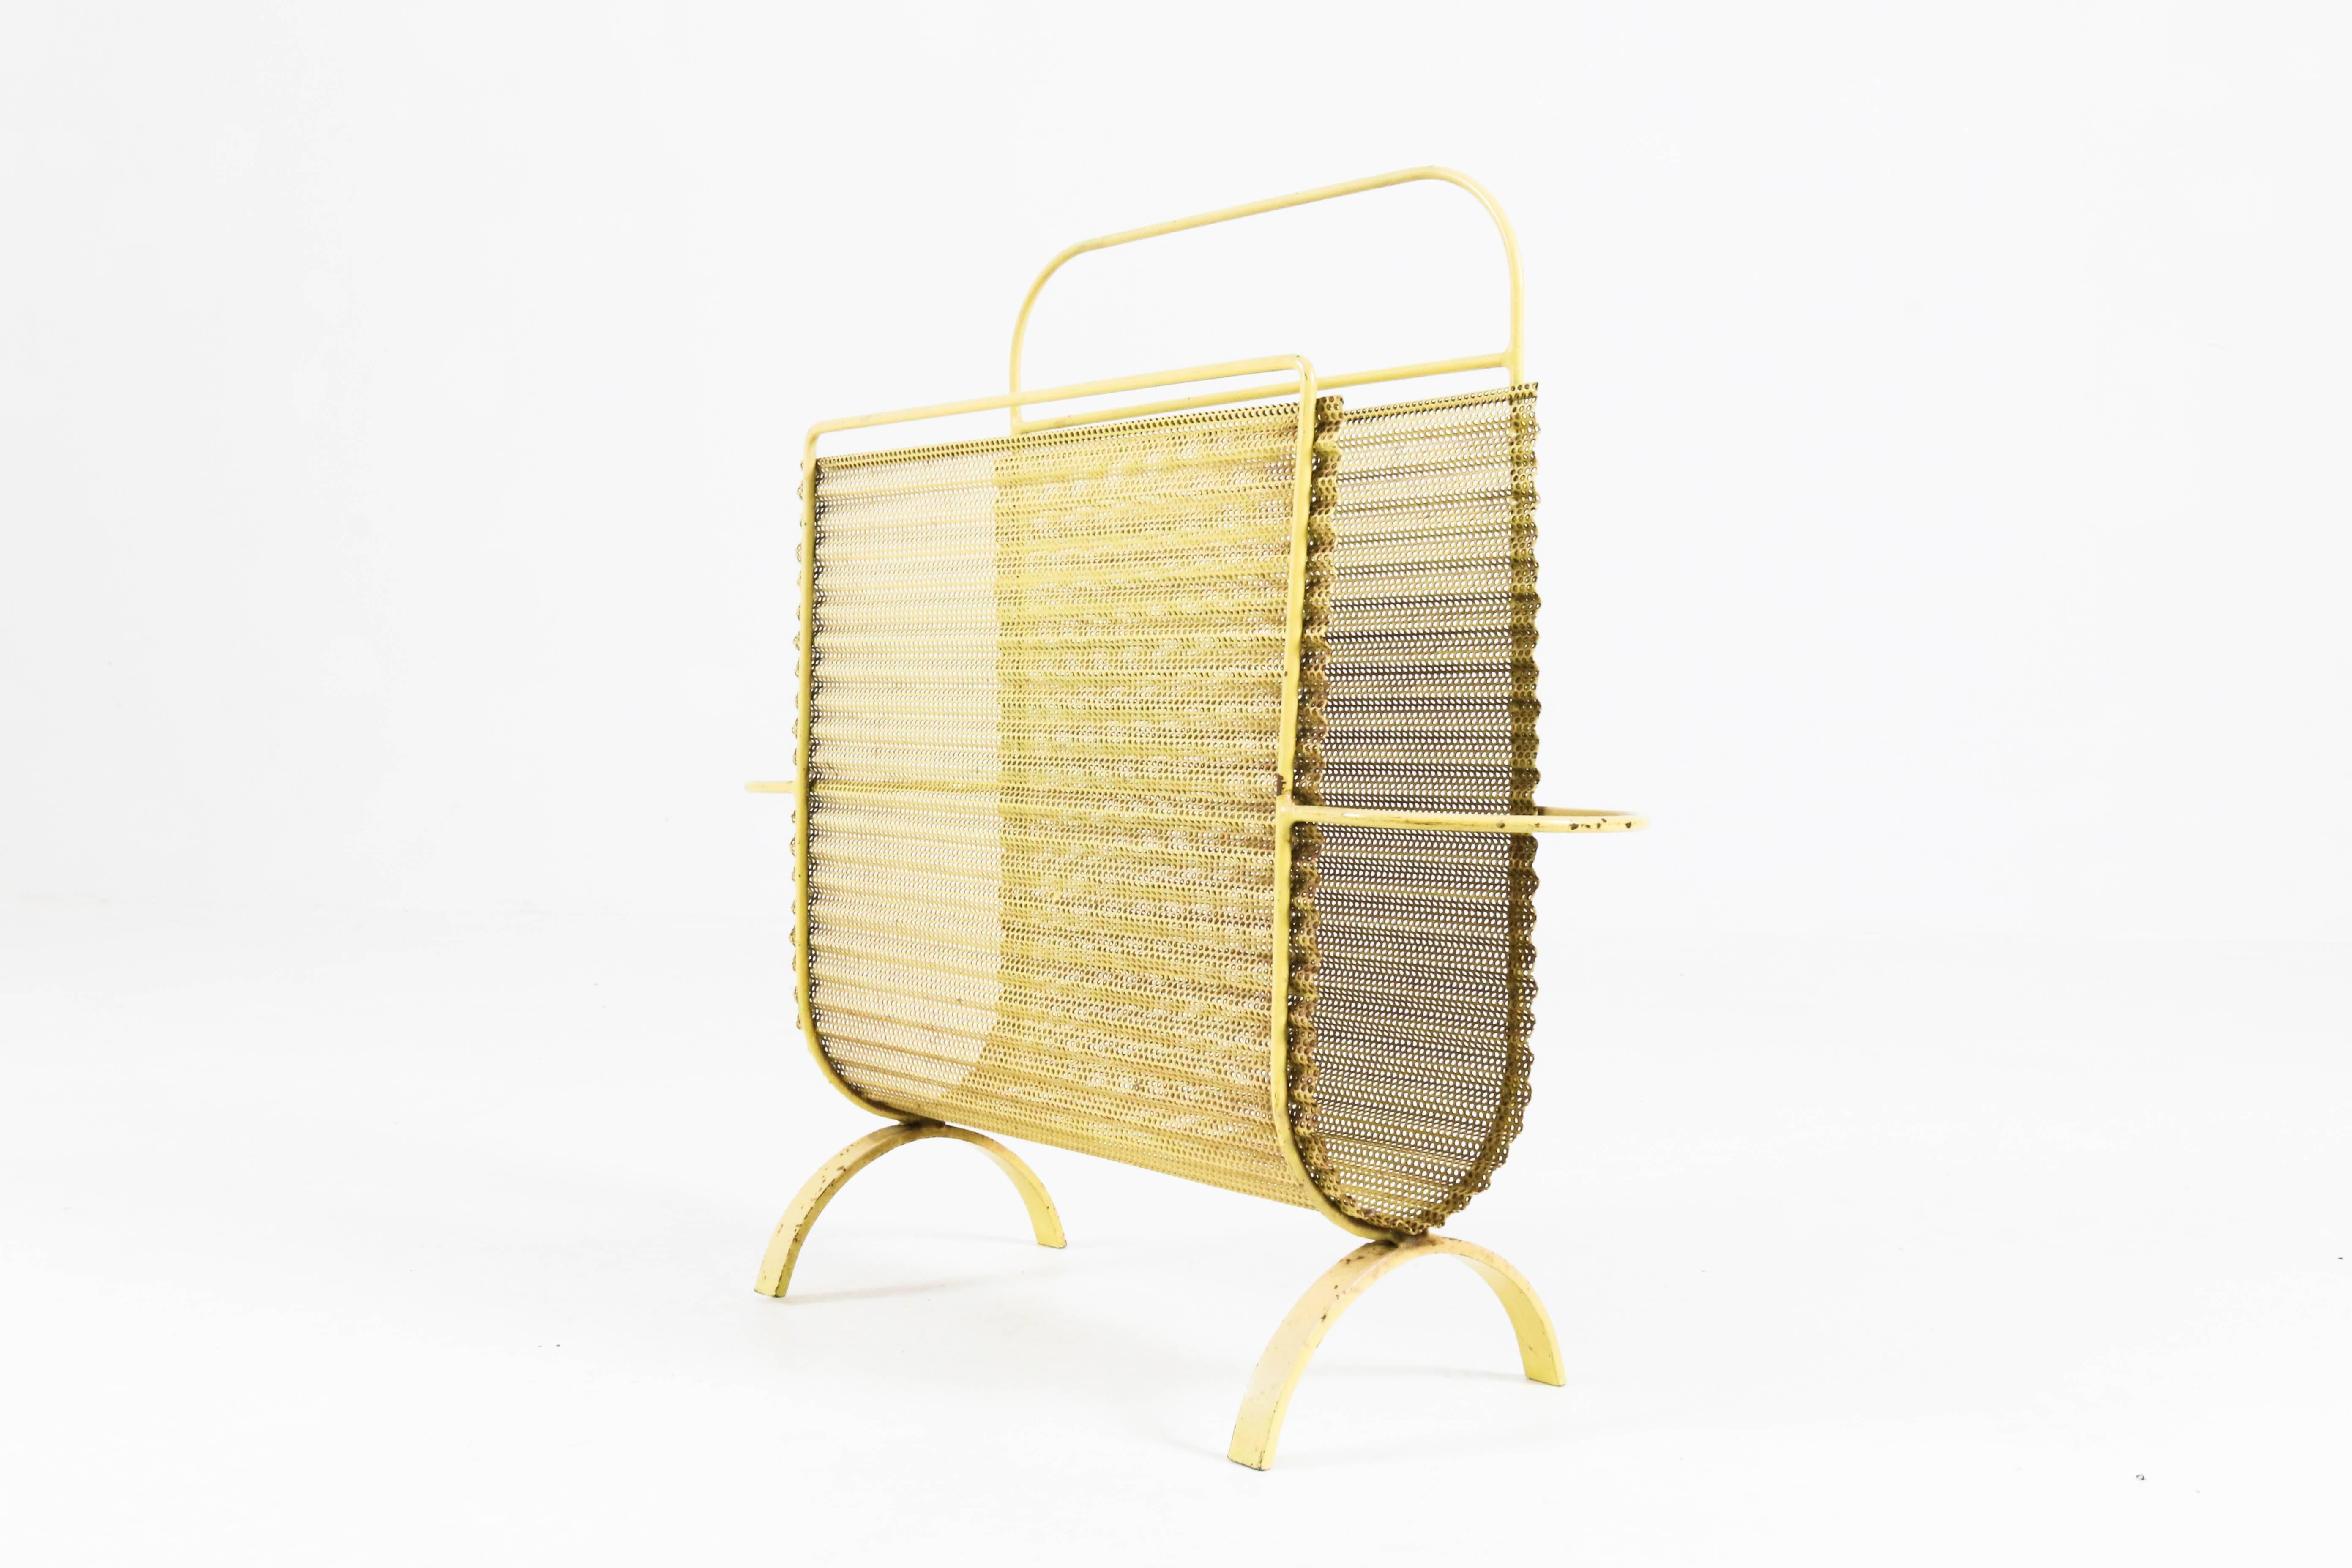 Elegant French Mid-Century Modern magazine holder by Mathieu Matégot, 1950s.
Model: Harpers by Ateliers Matégot, France.
Folded perforated metal.